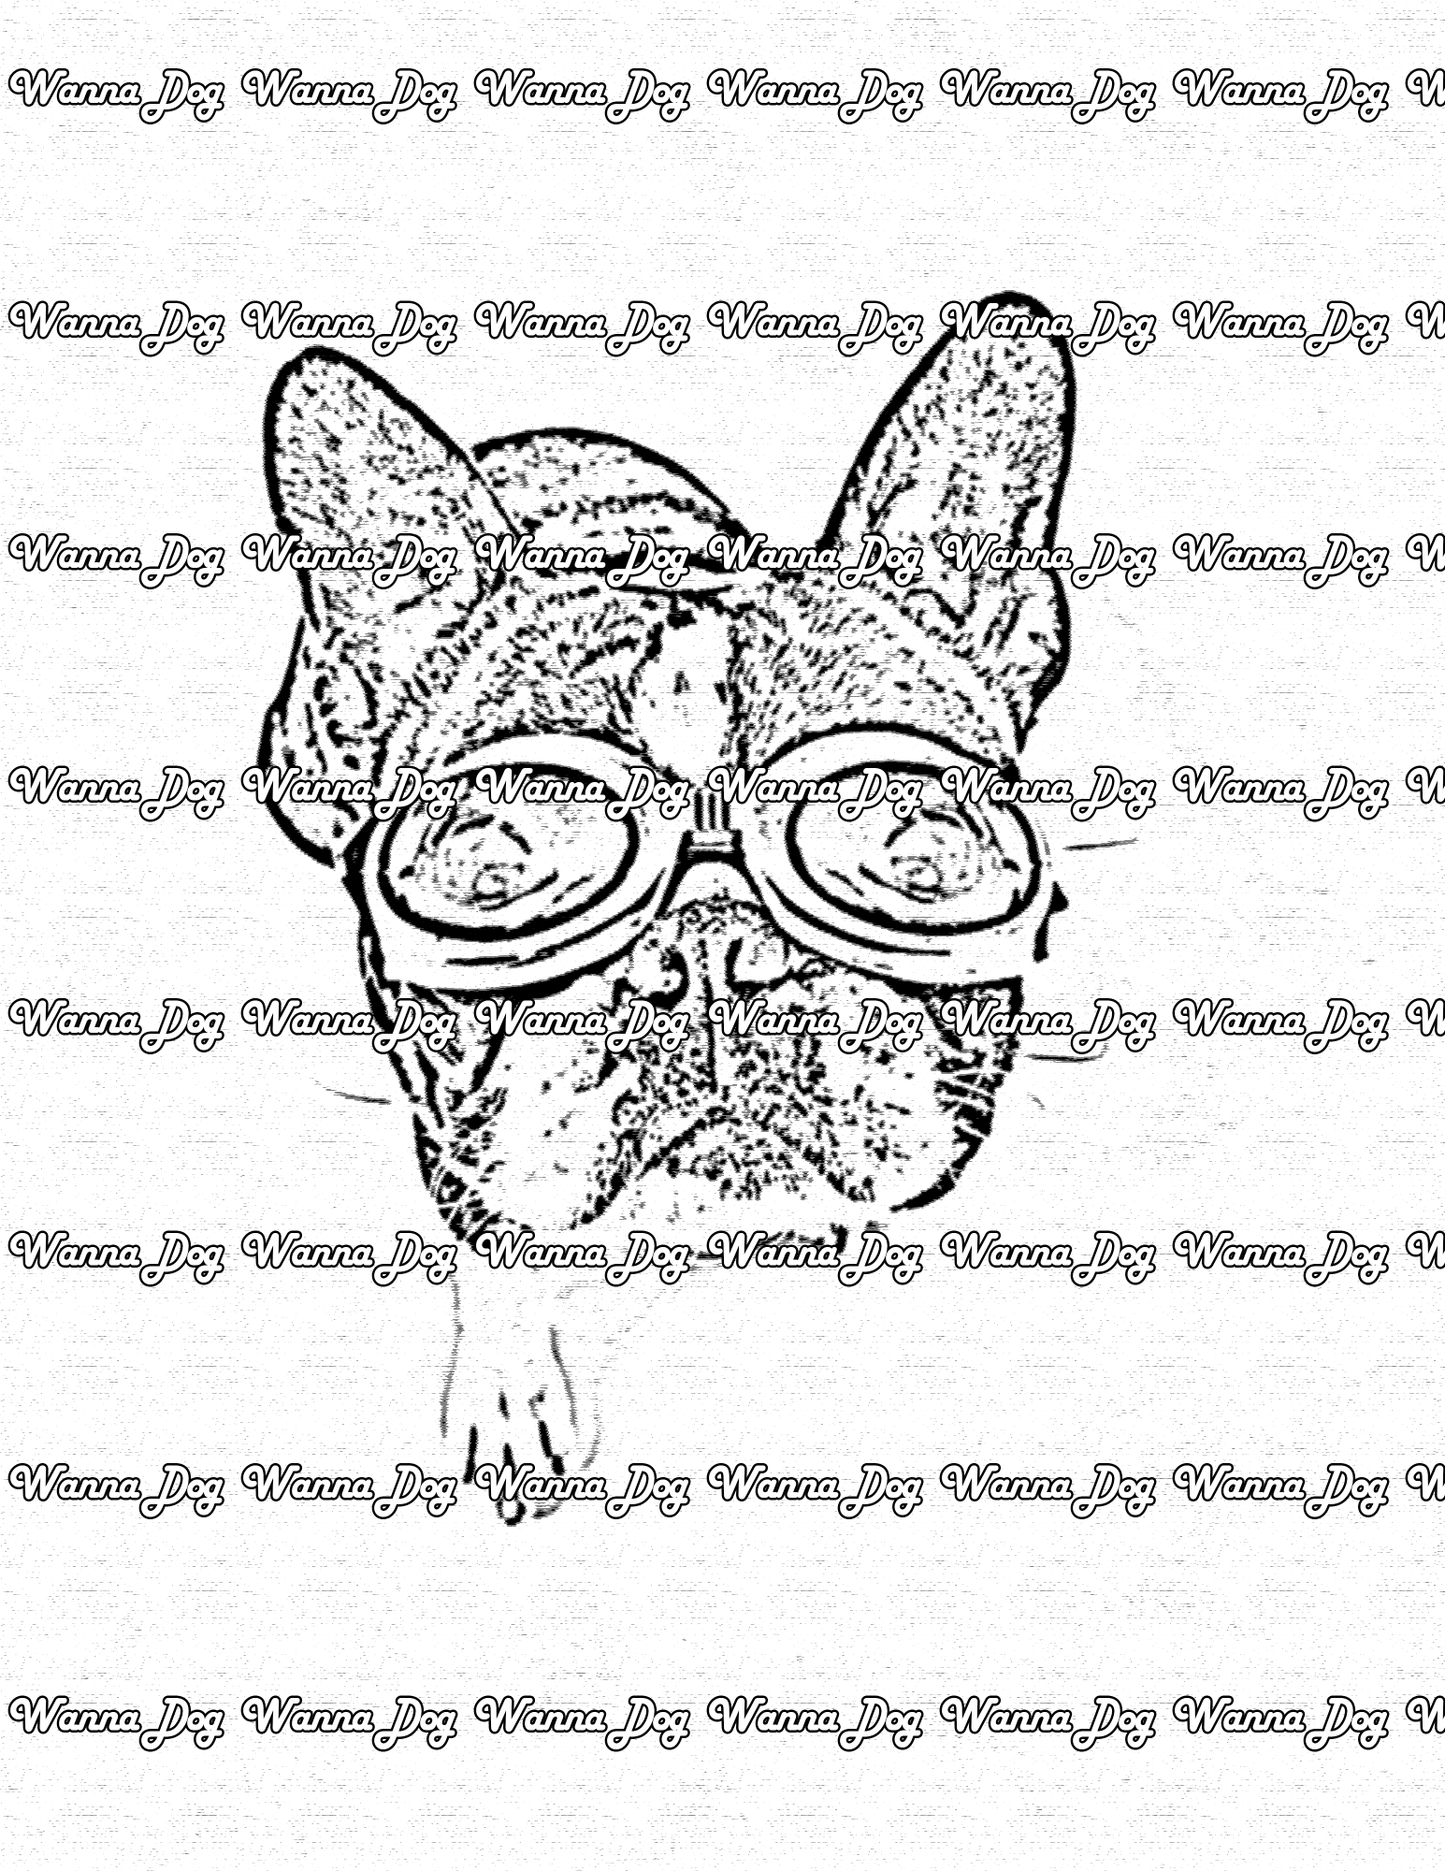 Boston Terrier Coloring Page of a Boston Terrier swimming goggles